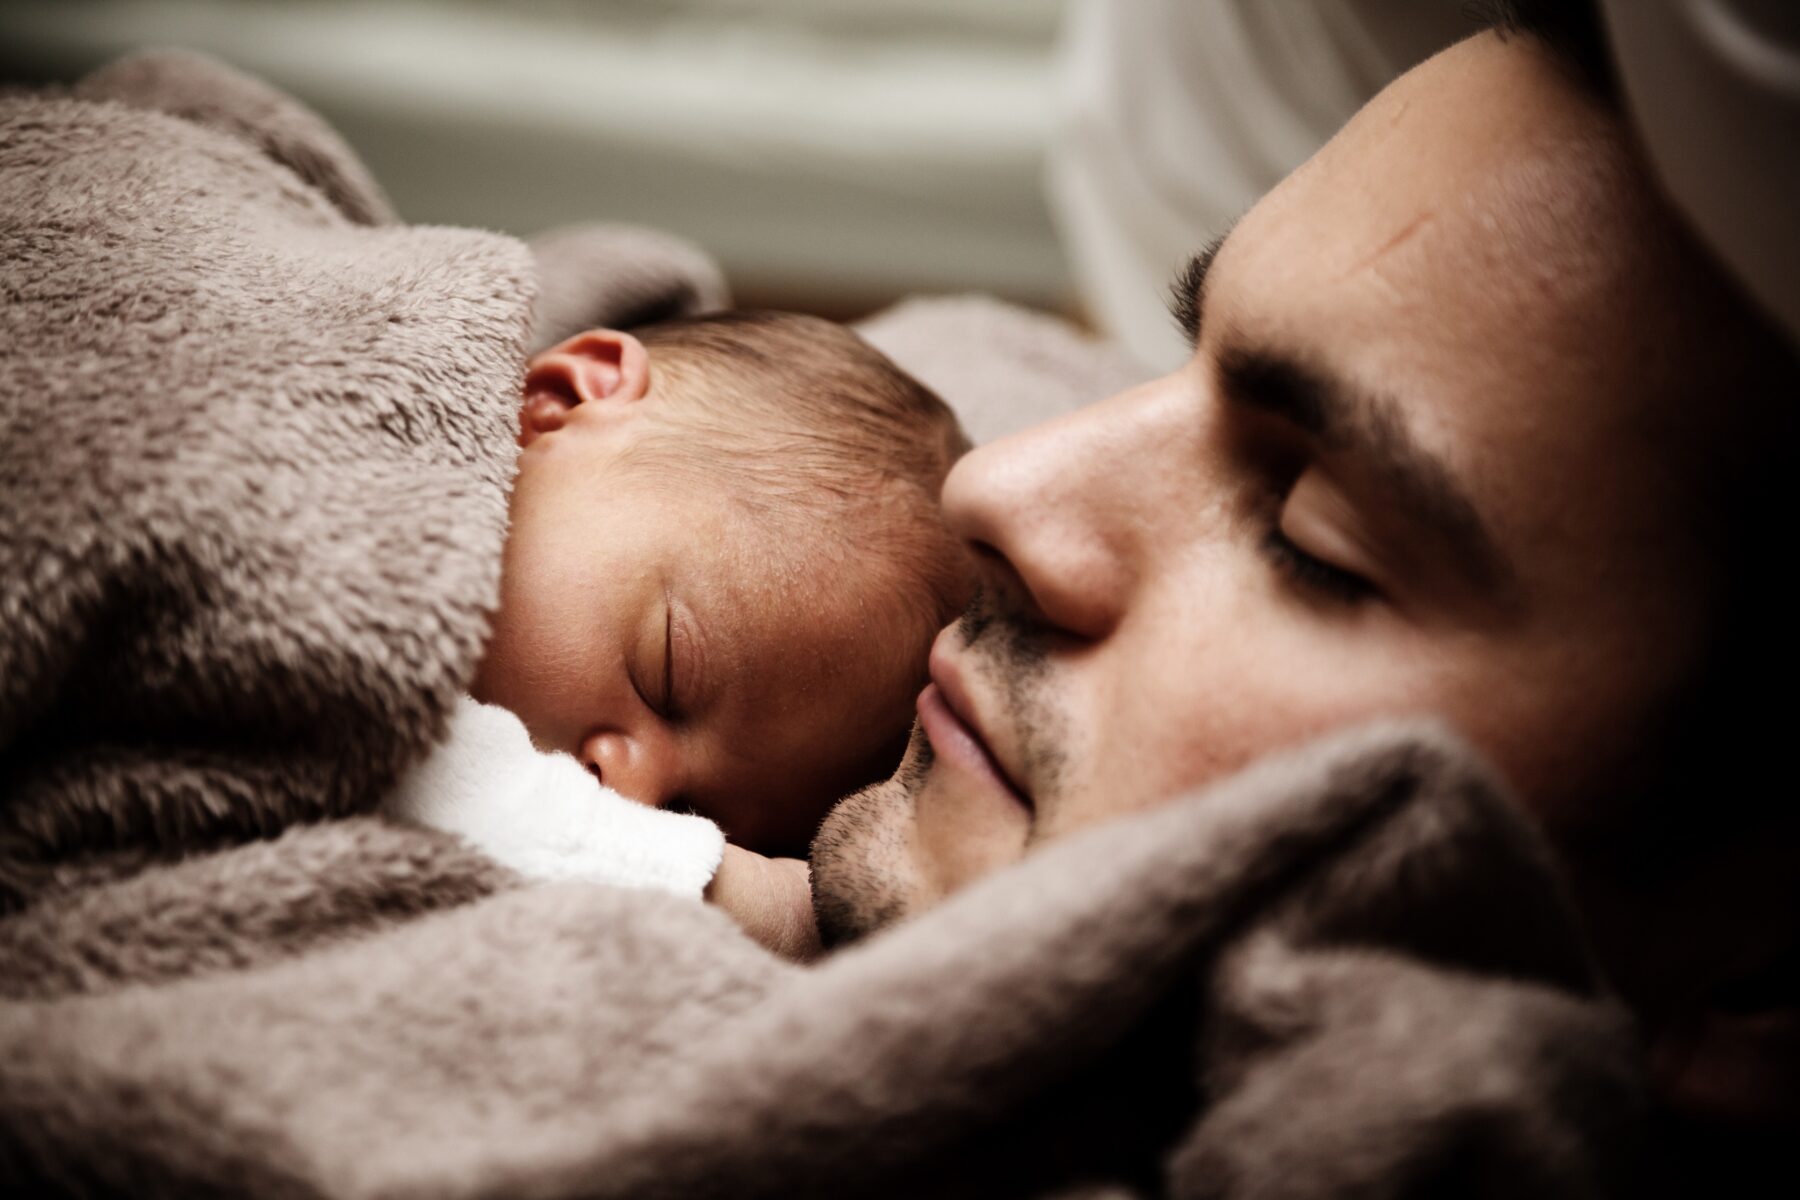 A father holds a baby in blankets while the both of them sleep.